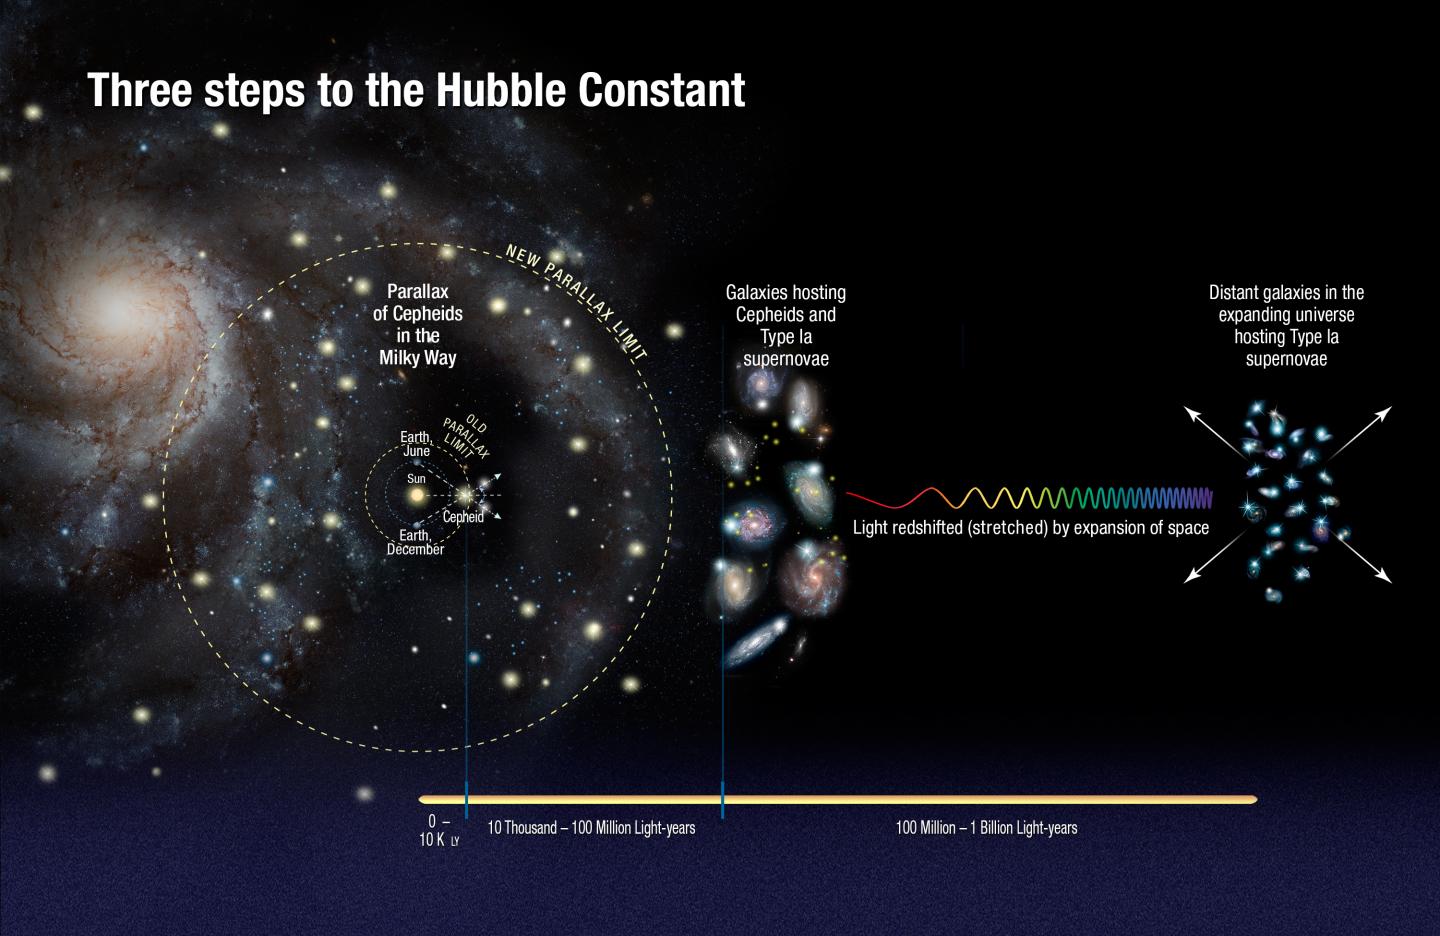 Three Steps to Hubble Constant (Artist's Illustration)